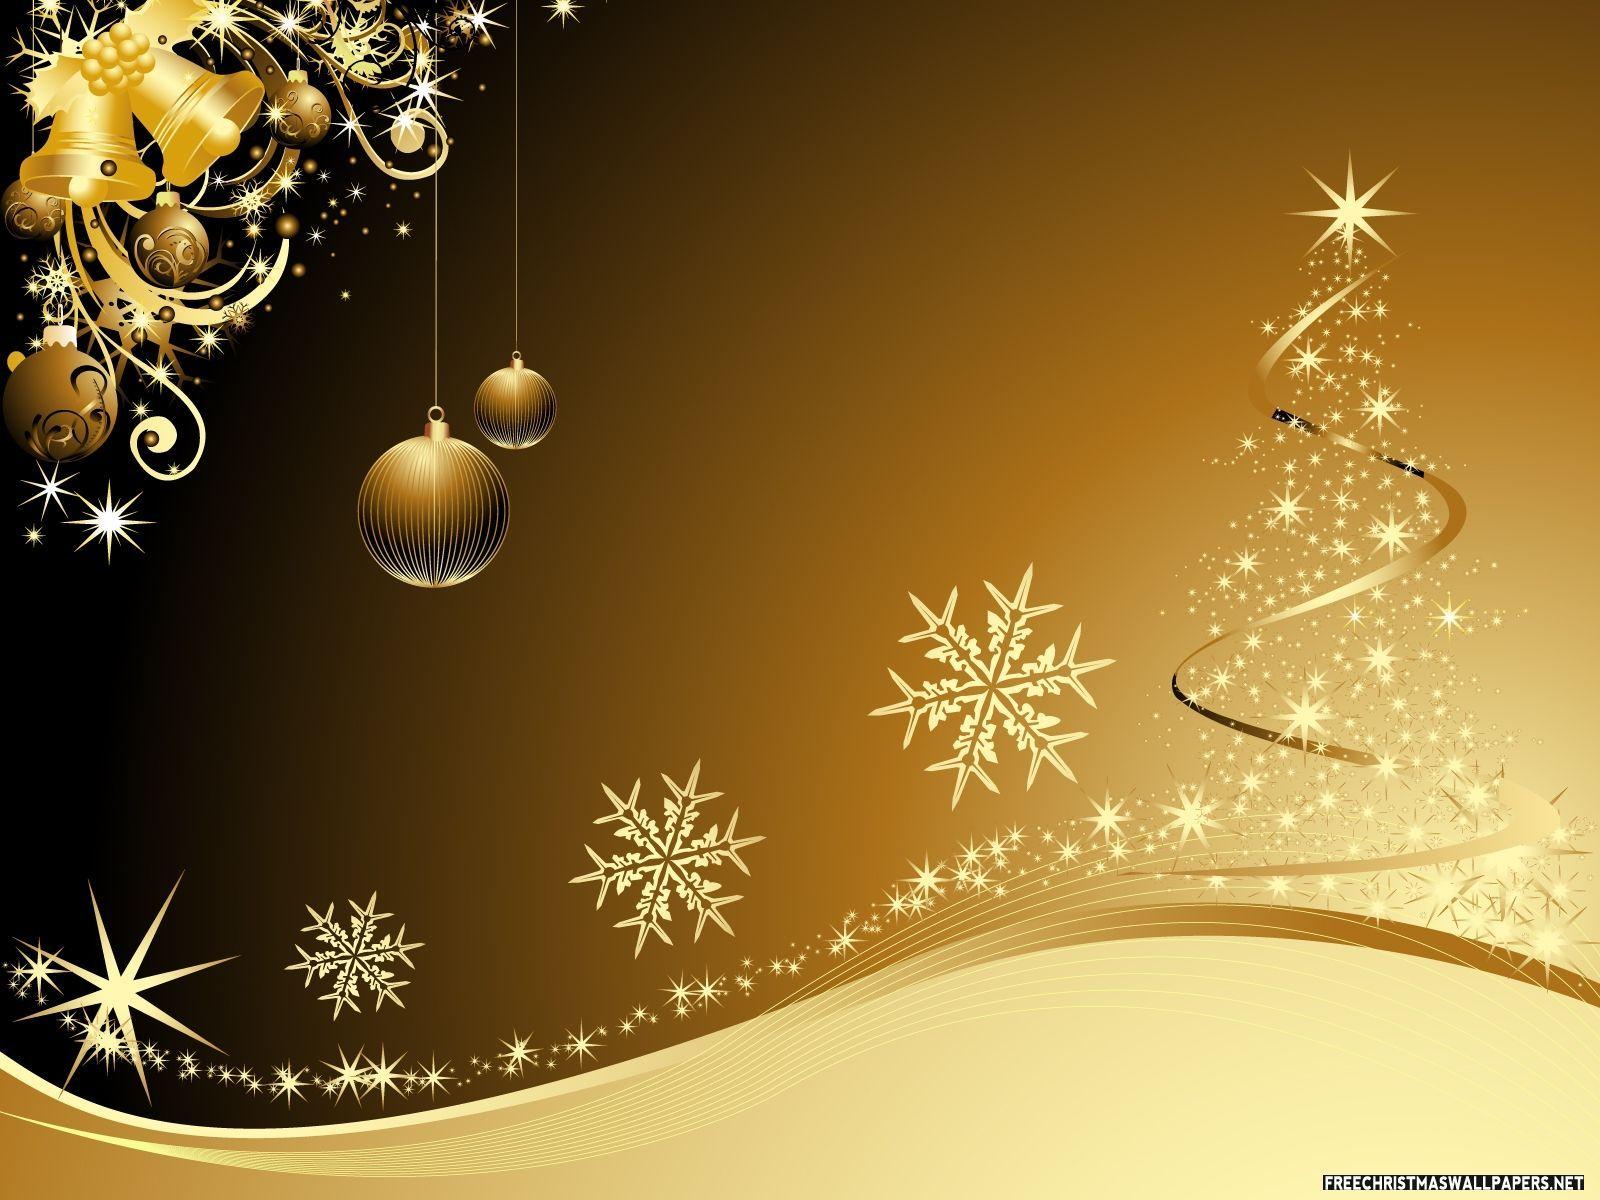 30 Merry Christmas Wallpapers and Backgrounds for your desktop  HD 2021